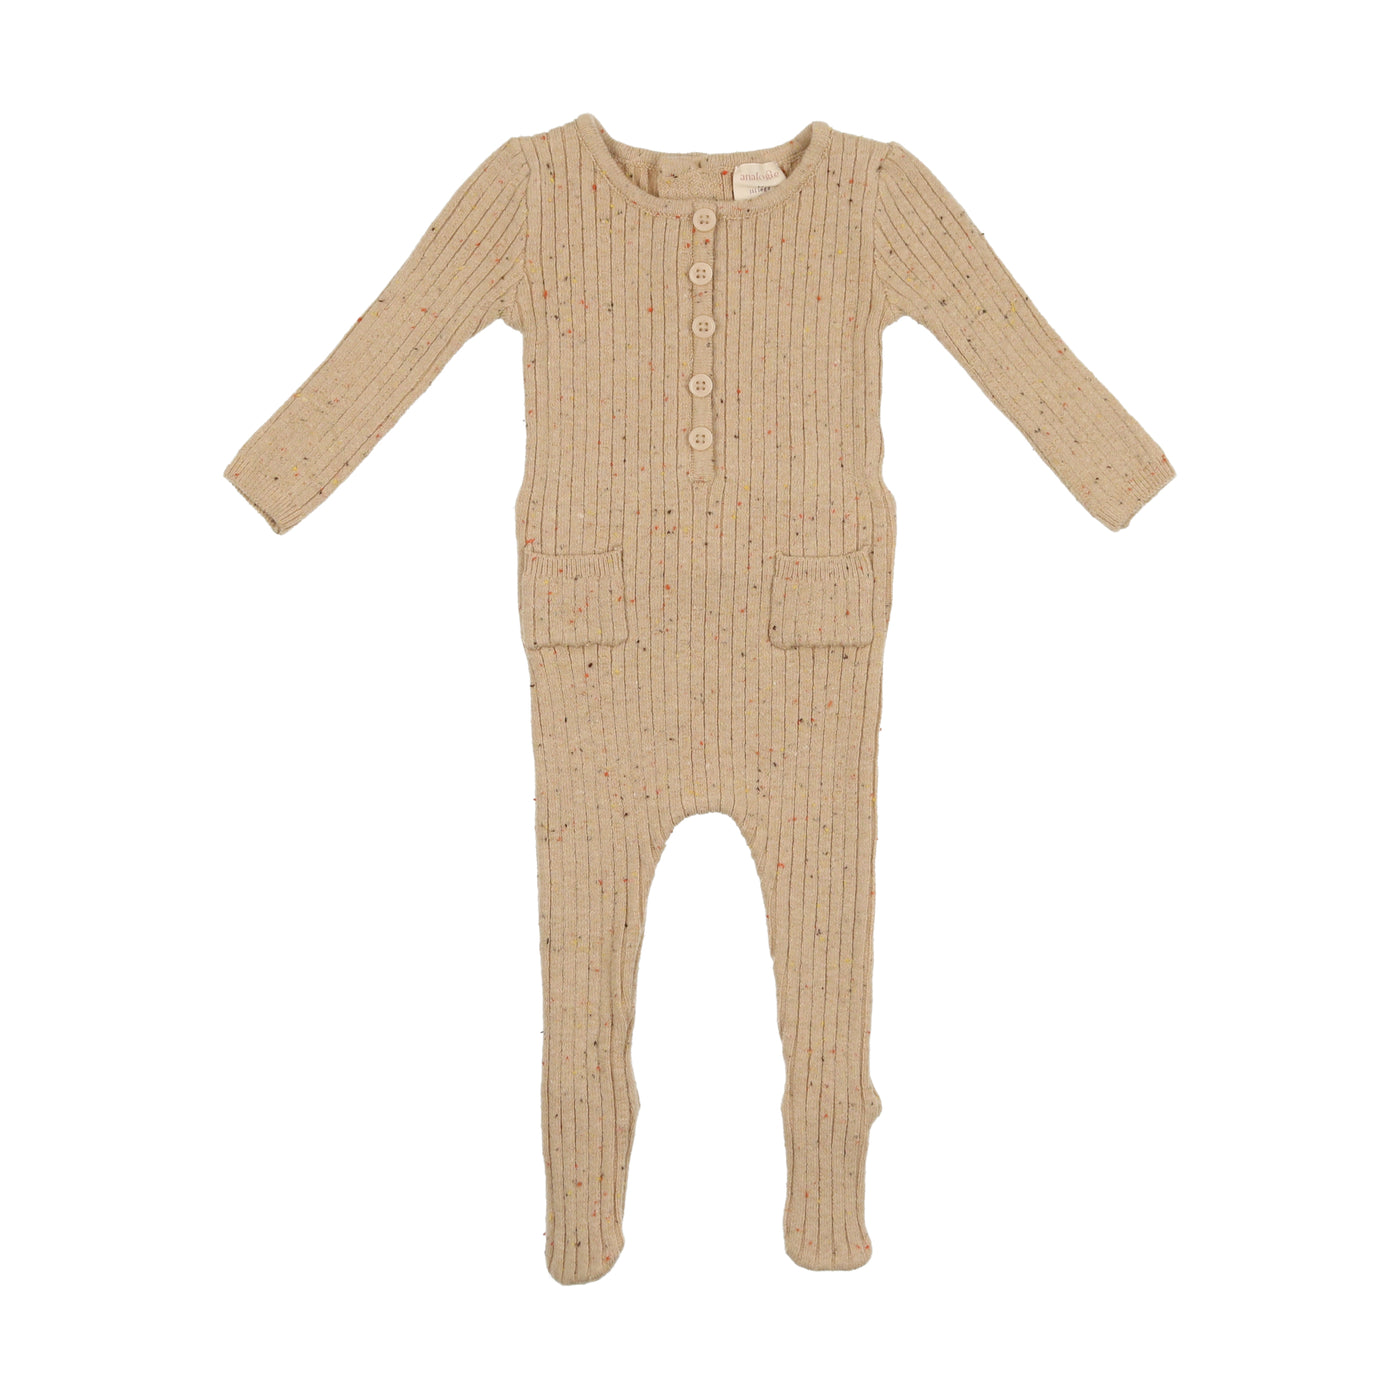 Analogie Two-Pocket Boys Toffee Speckle Knit Rib Footie with Bonnet